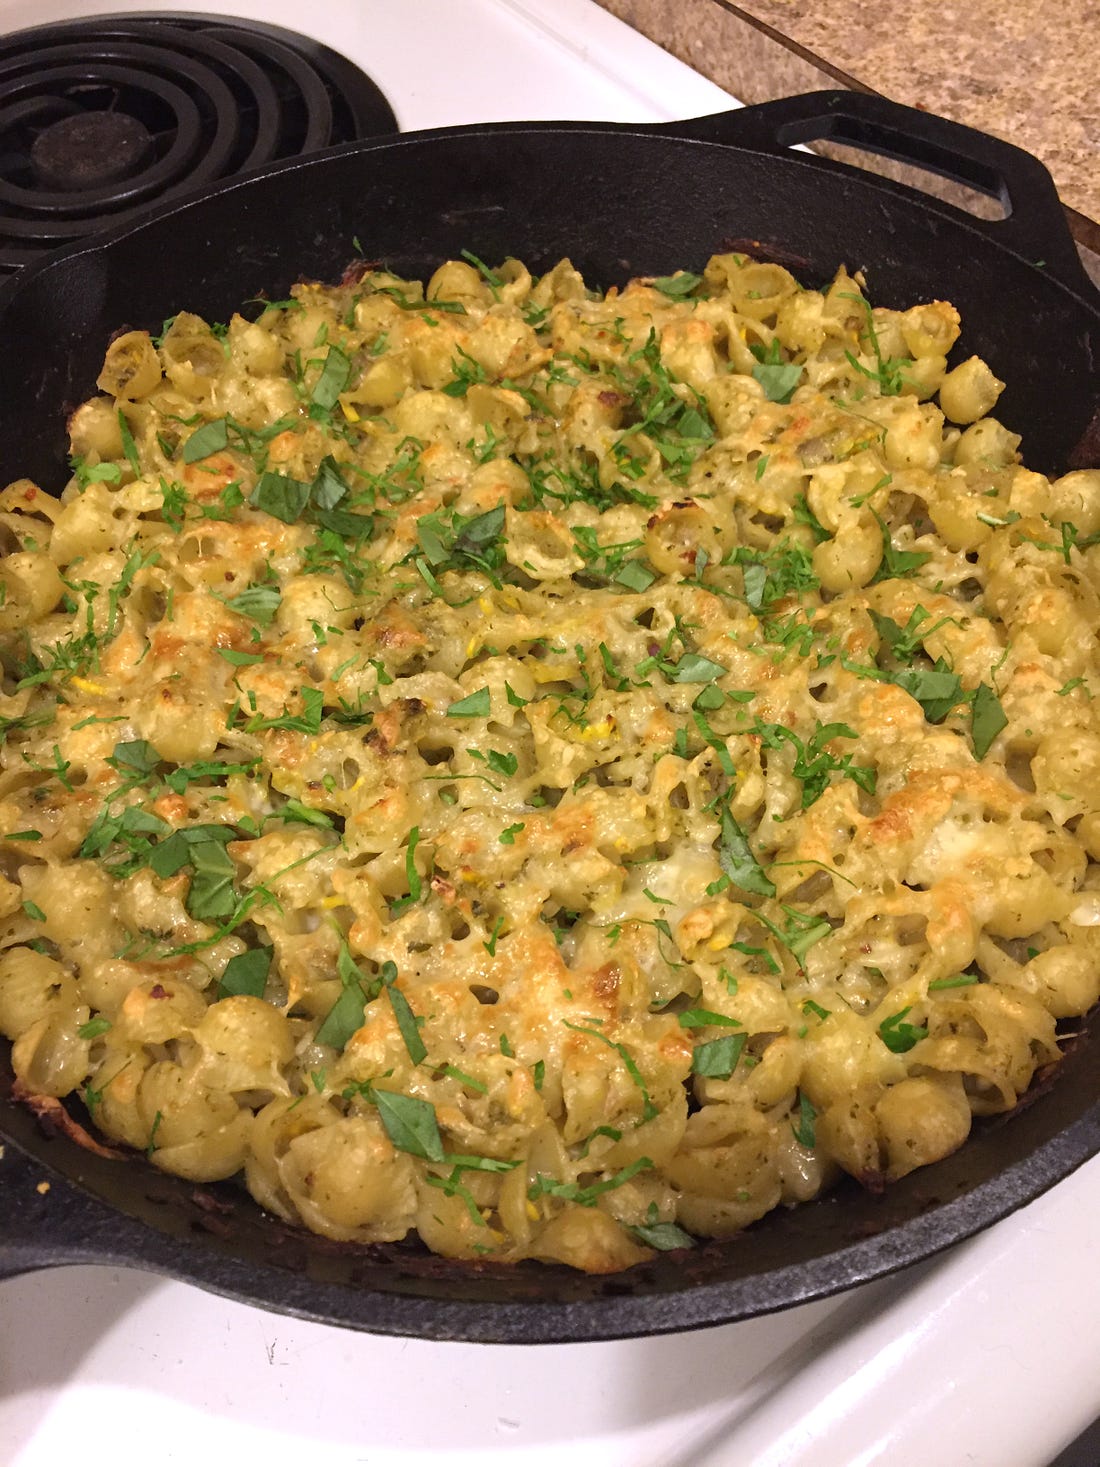 a cast-iron pan full of baked pasta shells. The cheese on top is browned, and sprinkled with parsley.